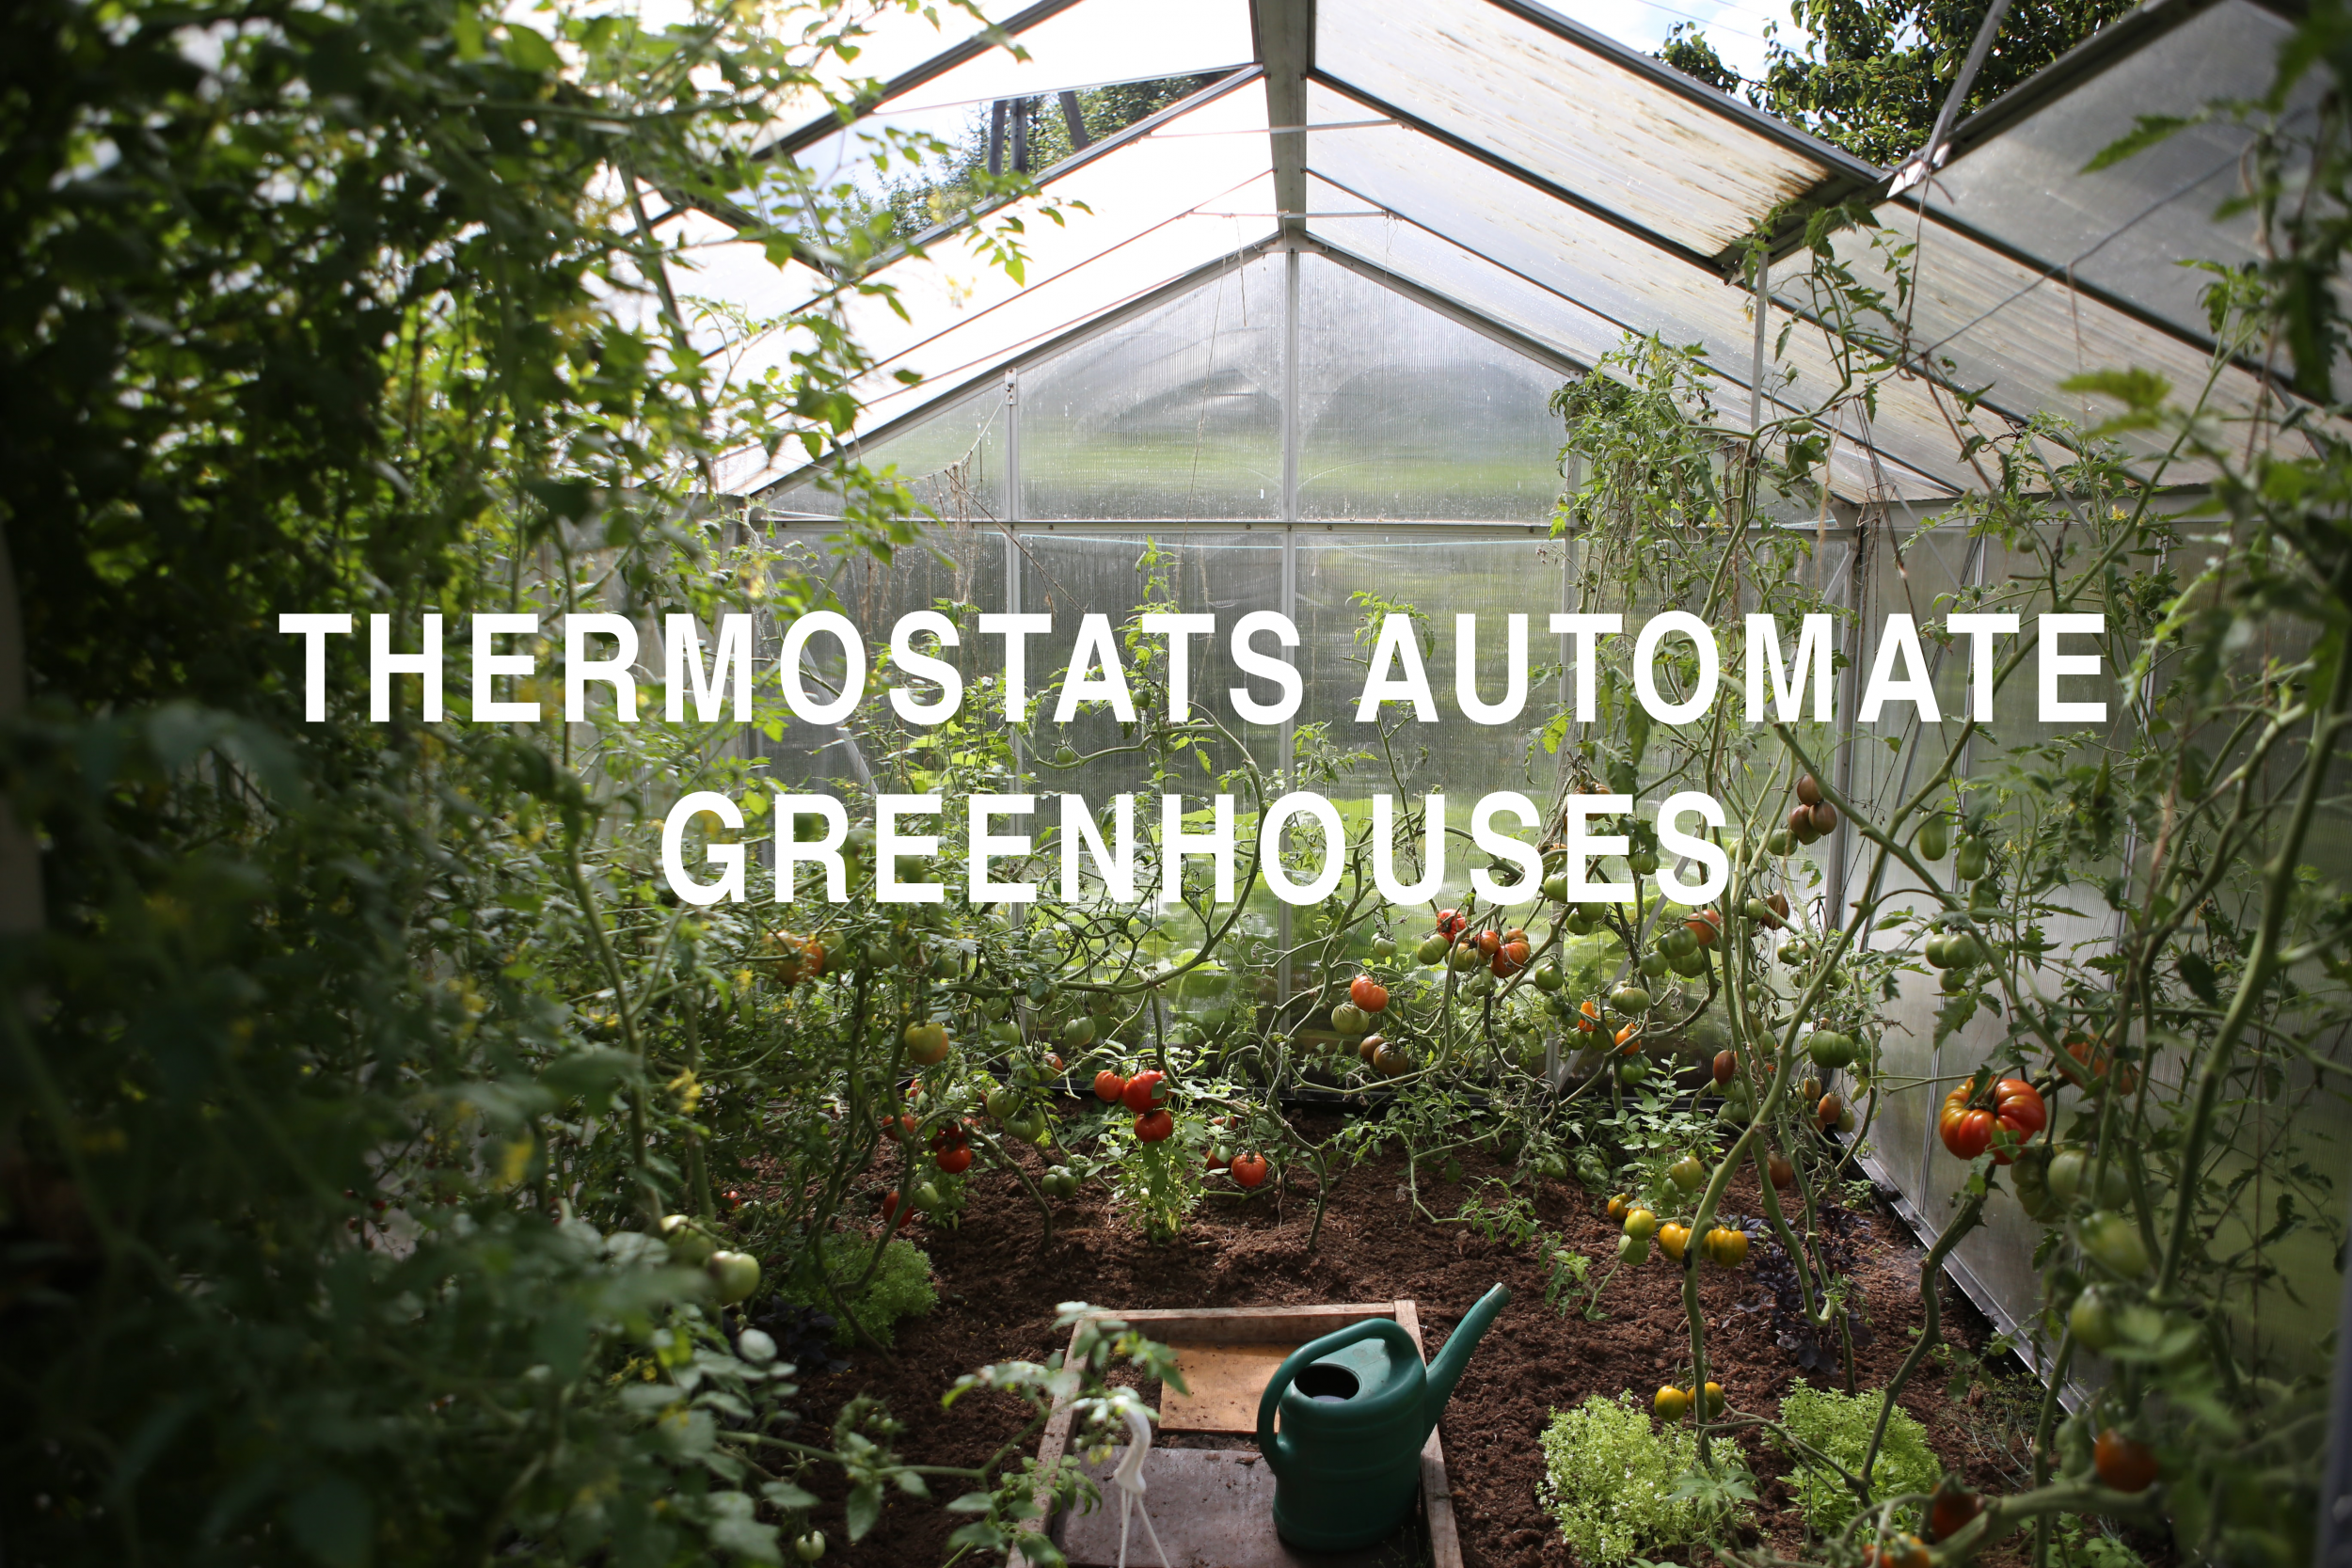 Thermostats Automate Greenhouses